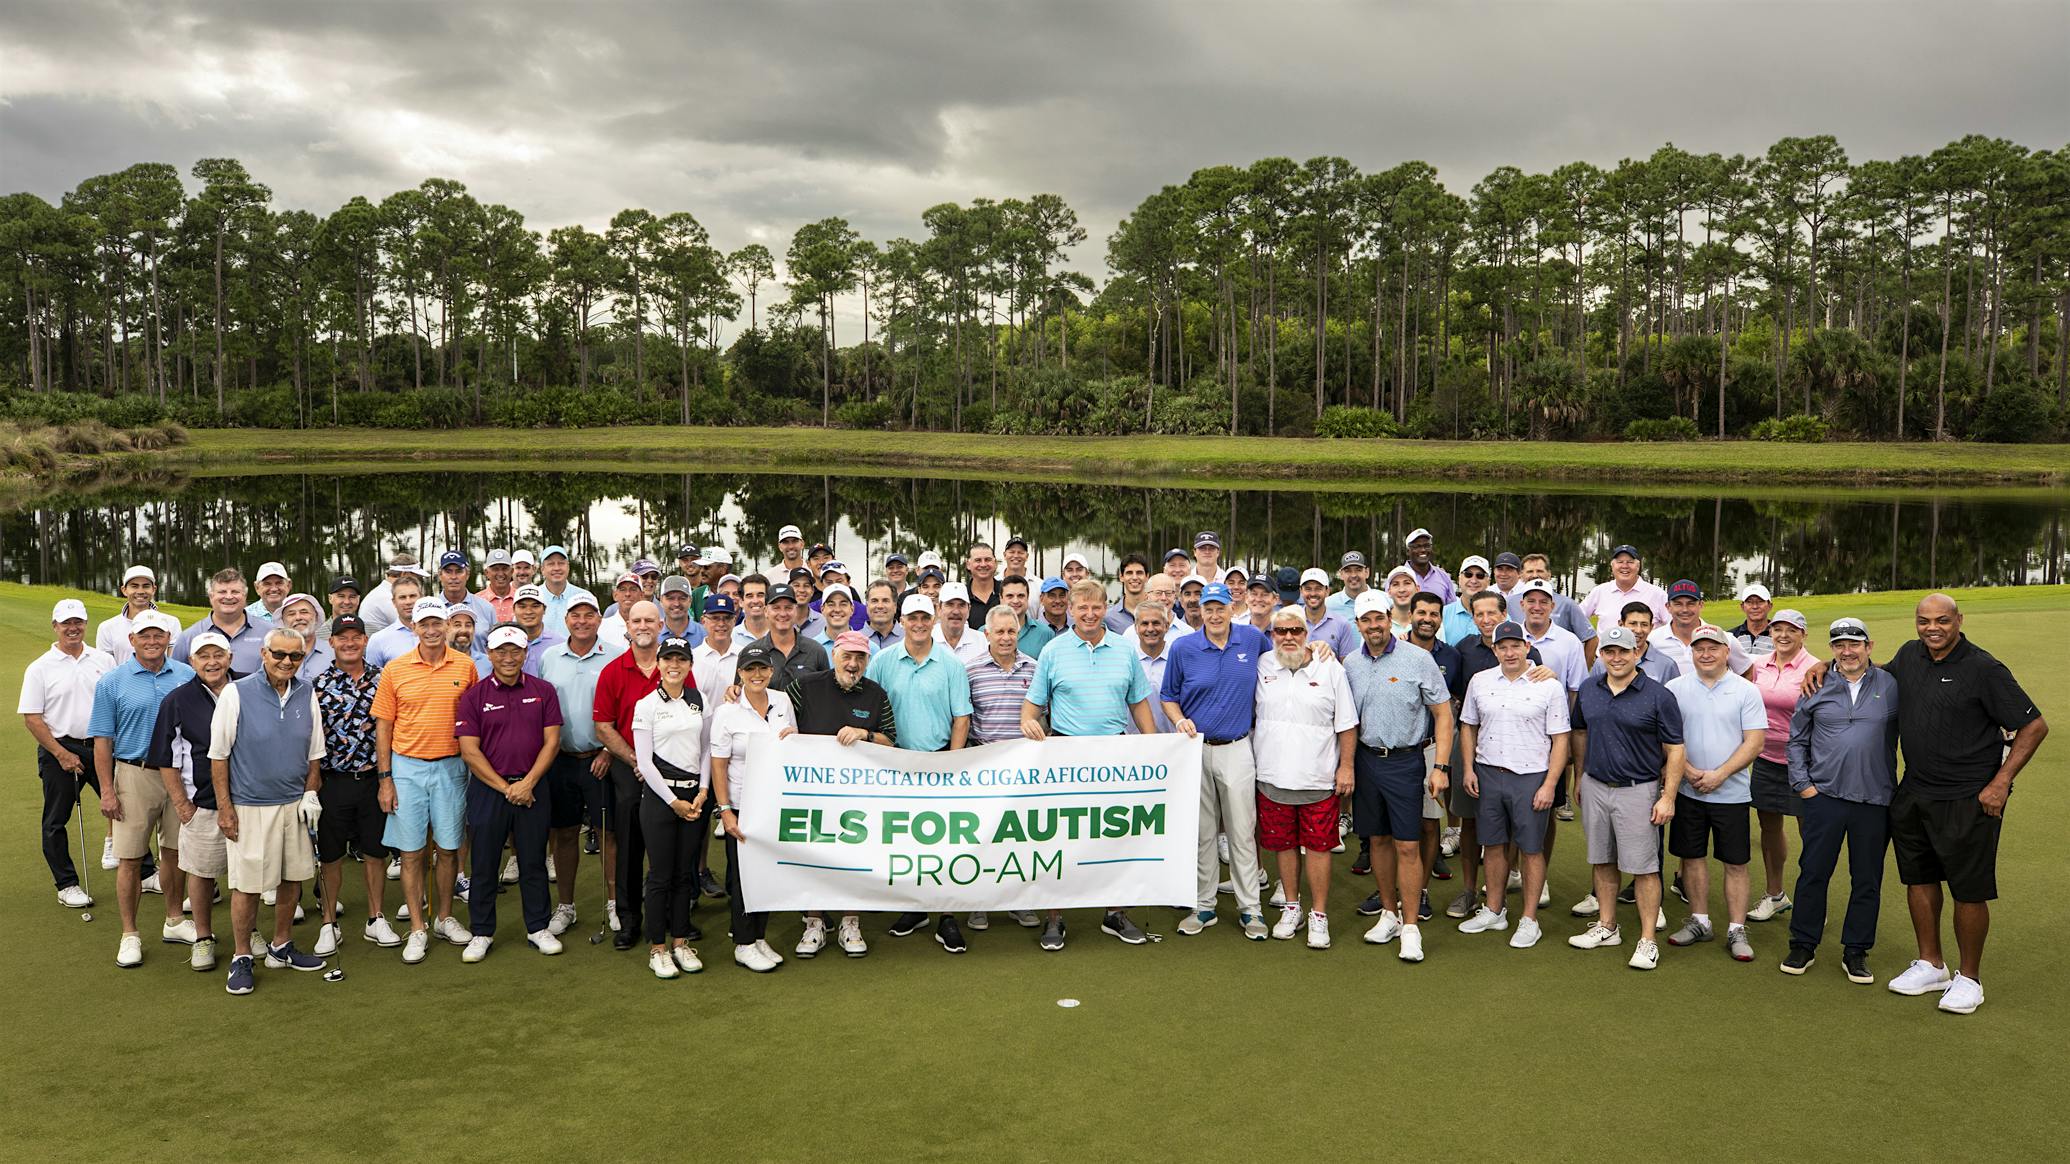 The 2021 Els for Autism Pro-Am